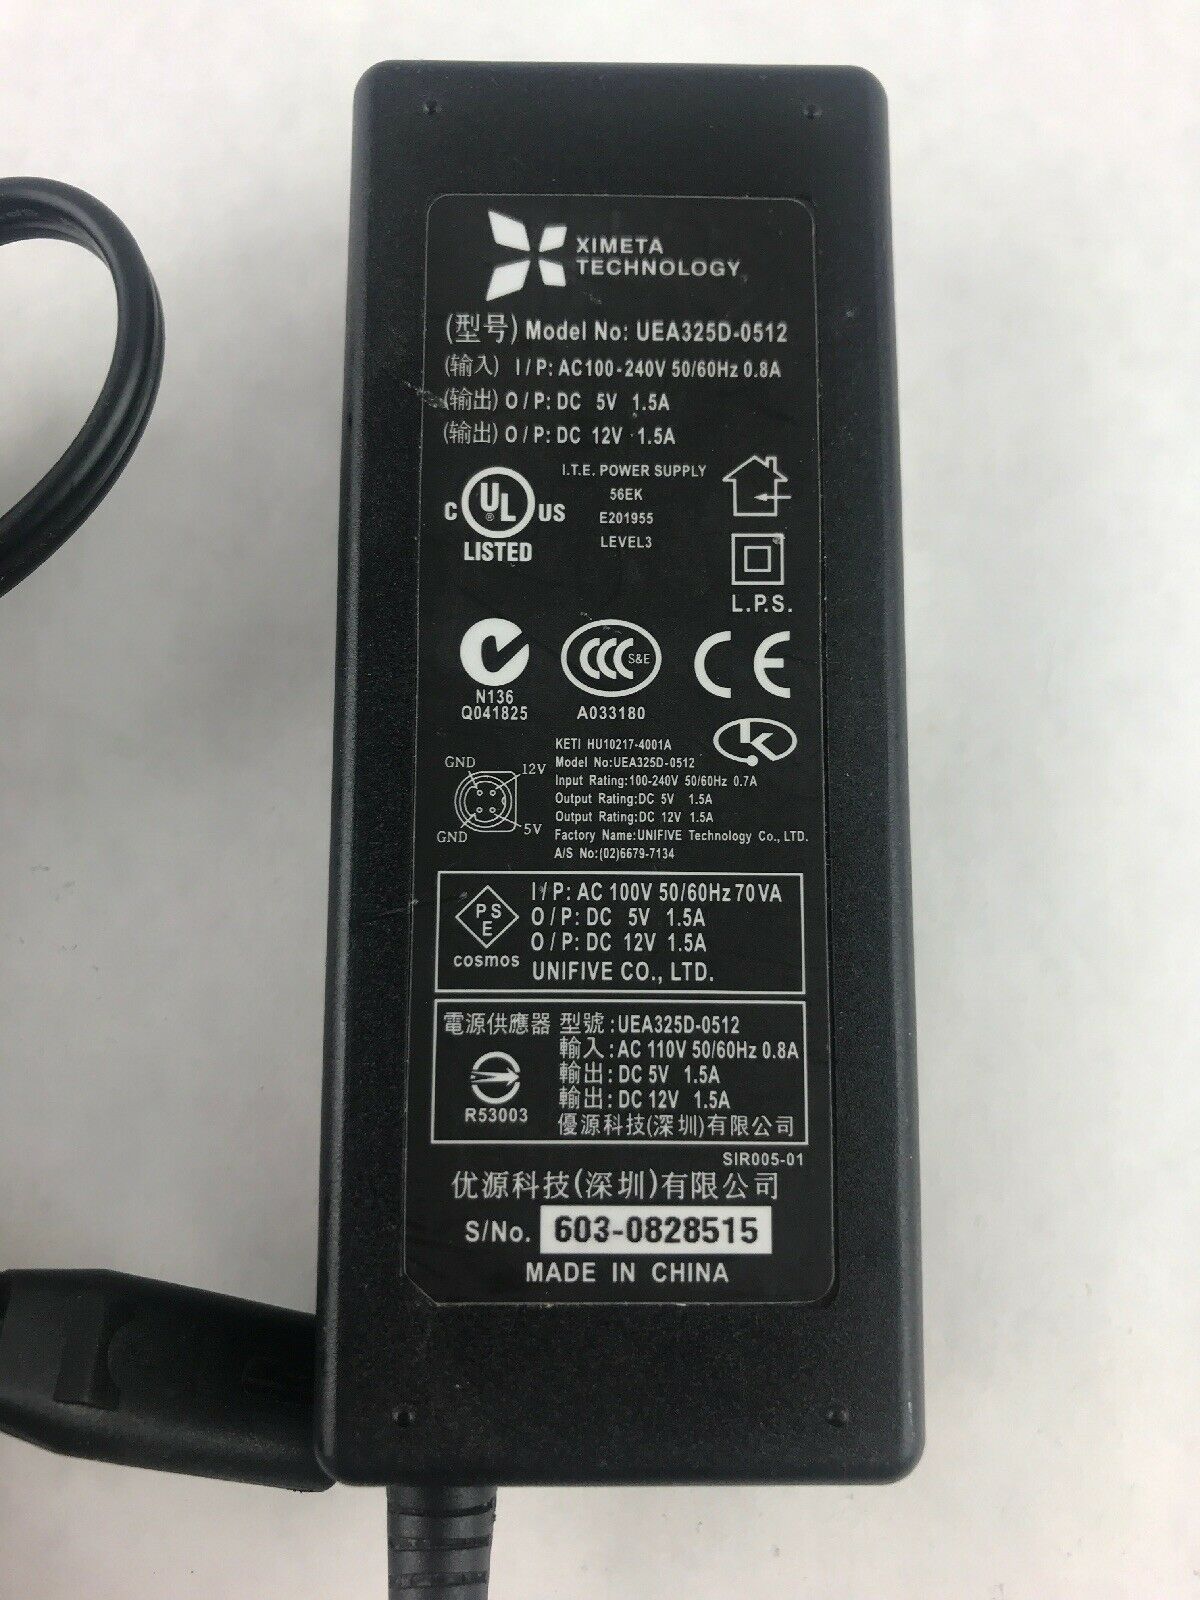 Ximeta Technology UEA325D-0512 AC Adapter Power Supply 12V 1.5A 4pin tip:4 pin Non-Domestic Product: No Modified Ite